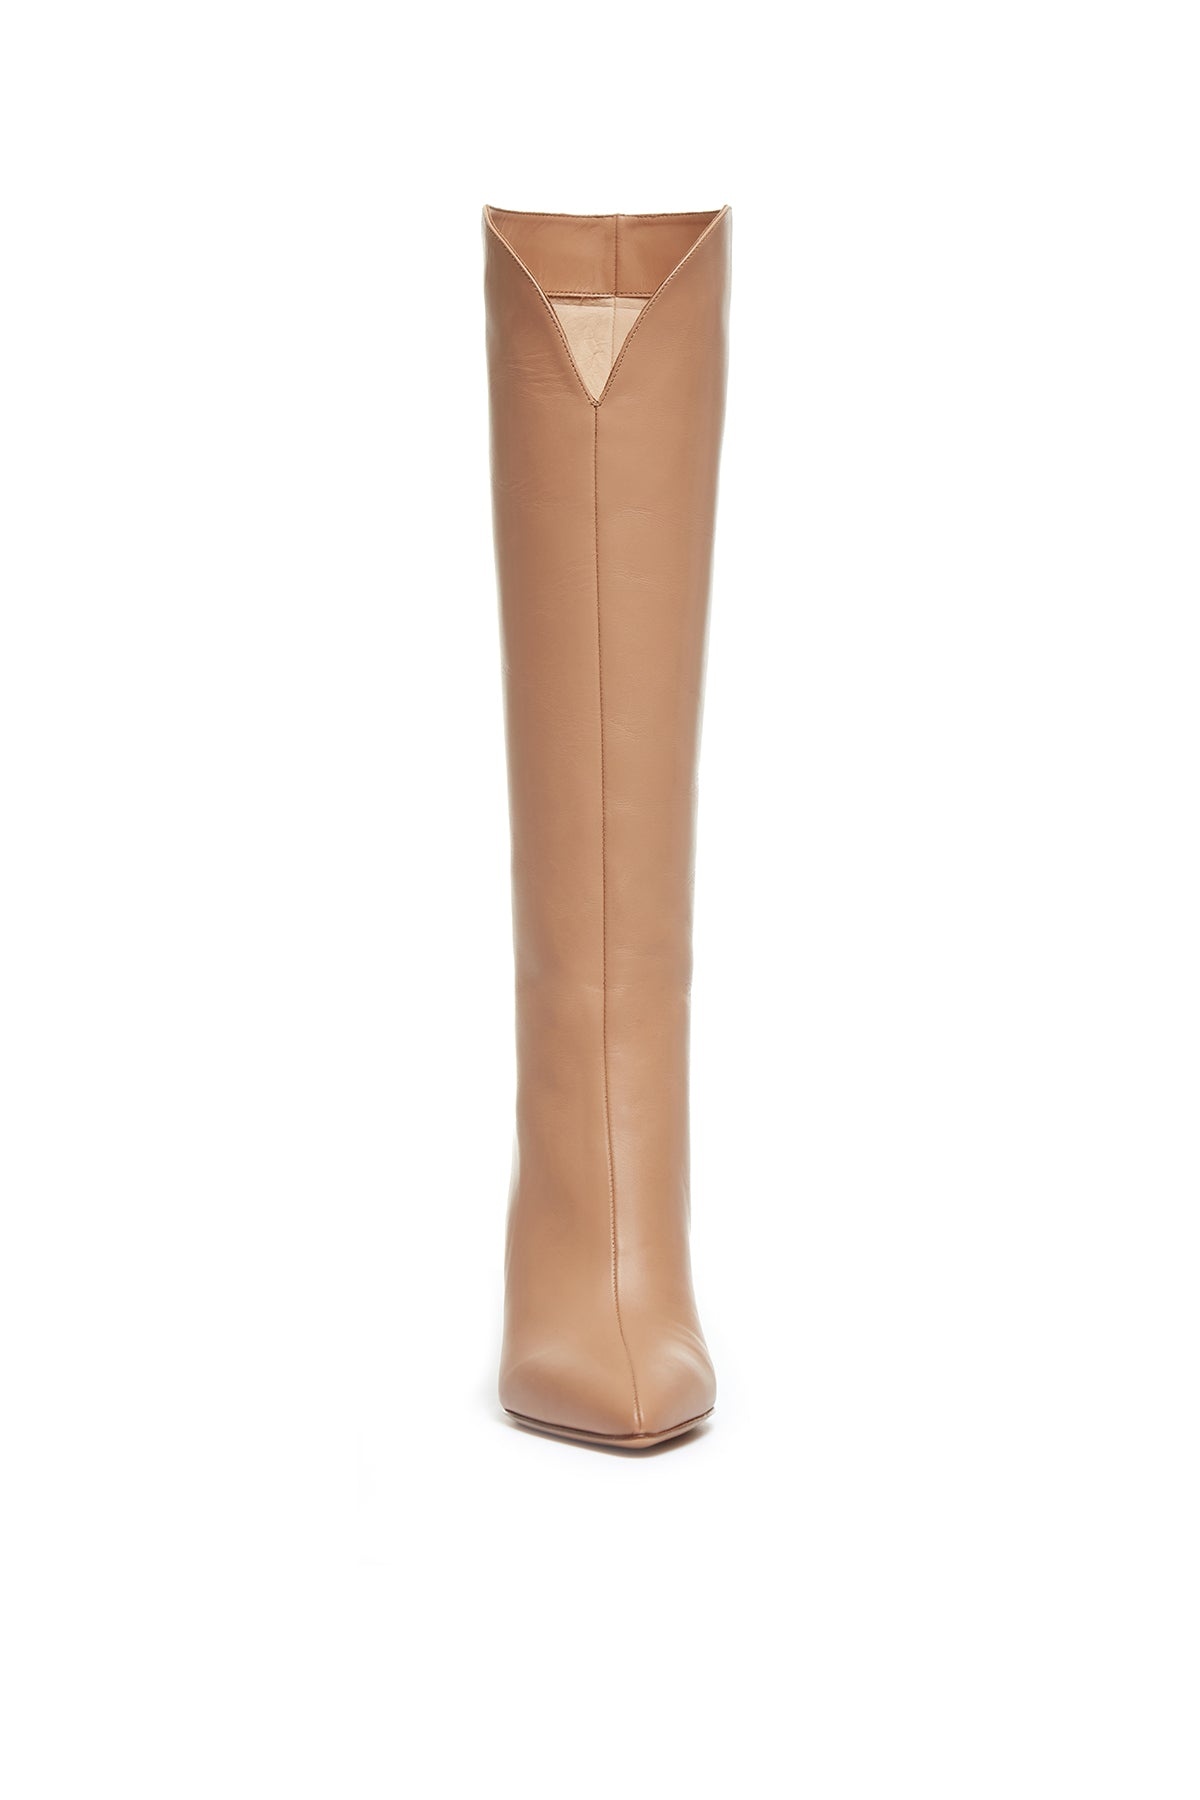 Cora Knee High Boot in Camel Leather - 4